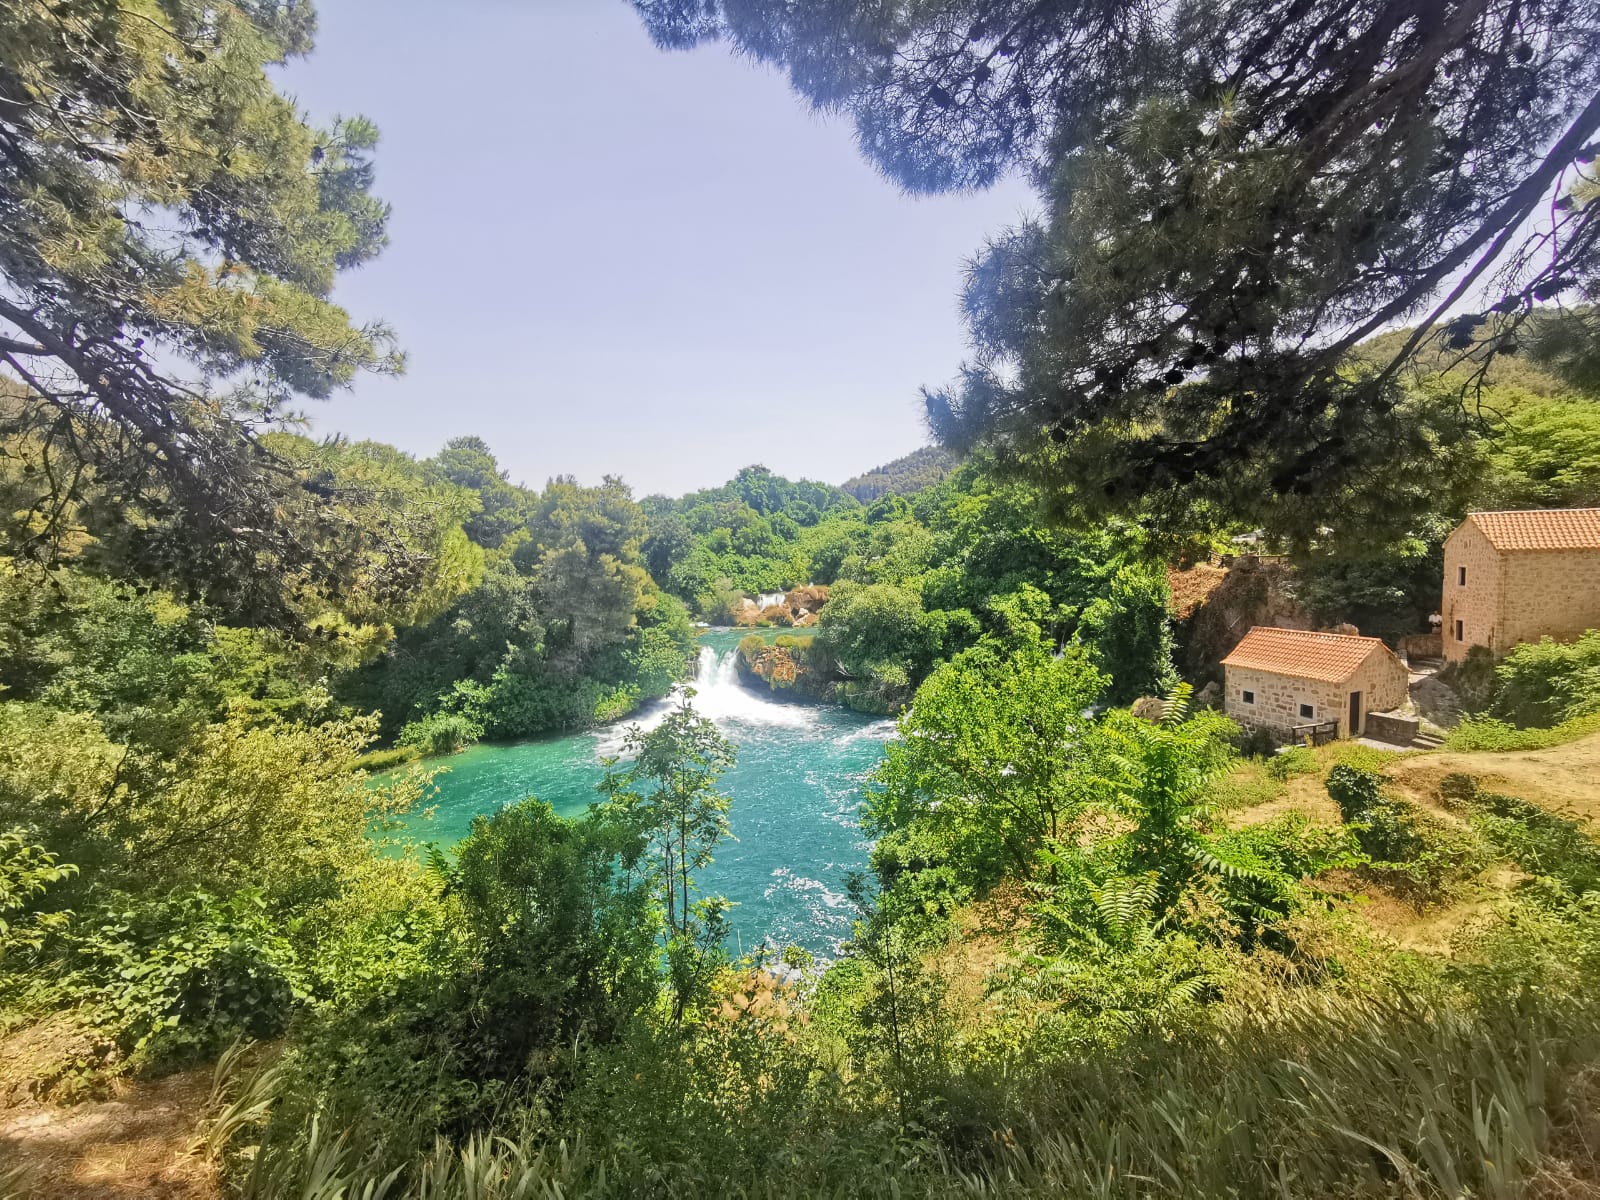 What tours can you do around Krka